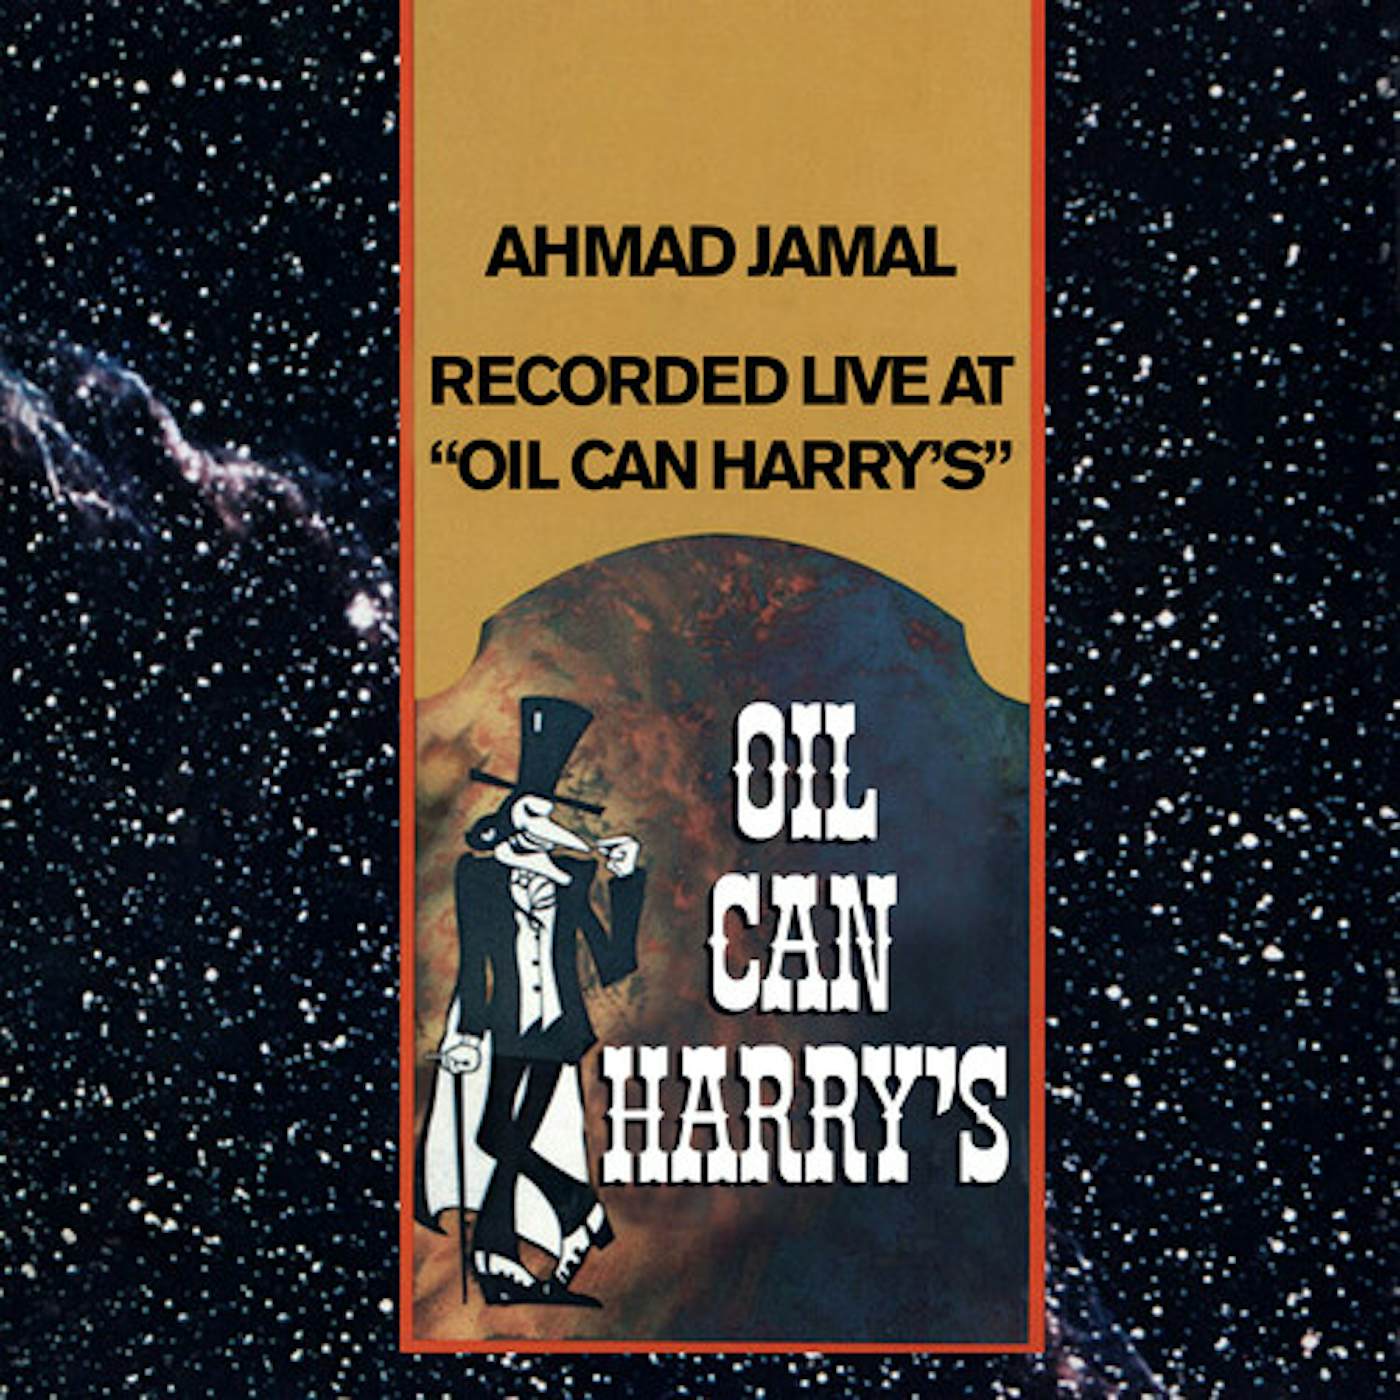 Ahmad Jamal RECORDED LIVE AT OIL CAN HARRY'S CD